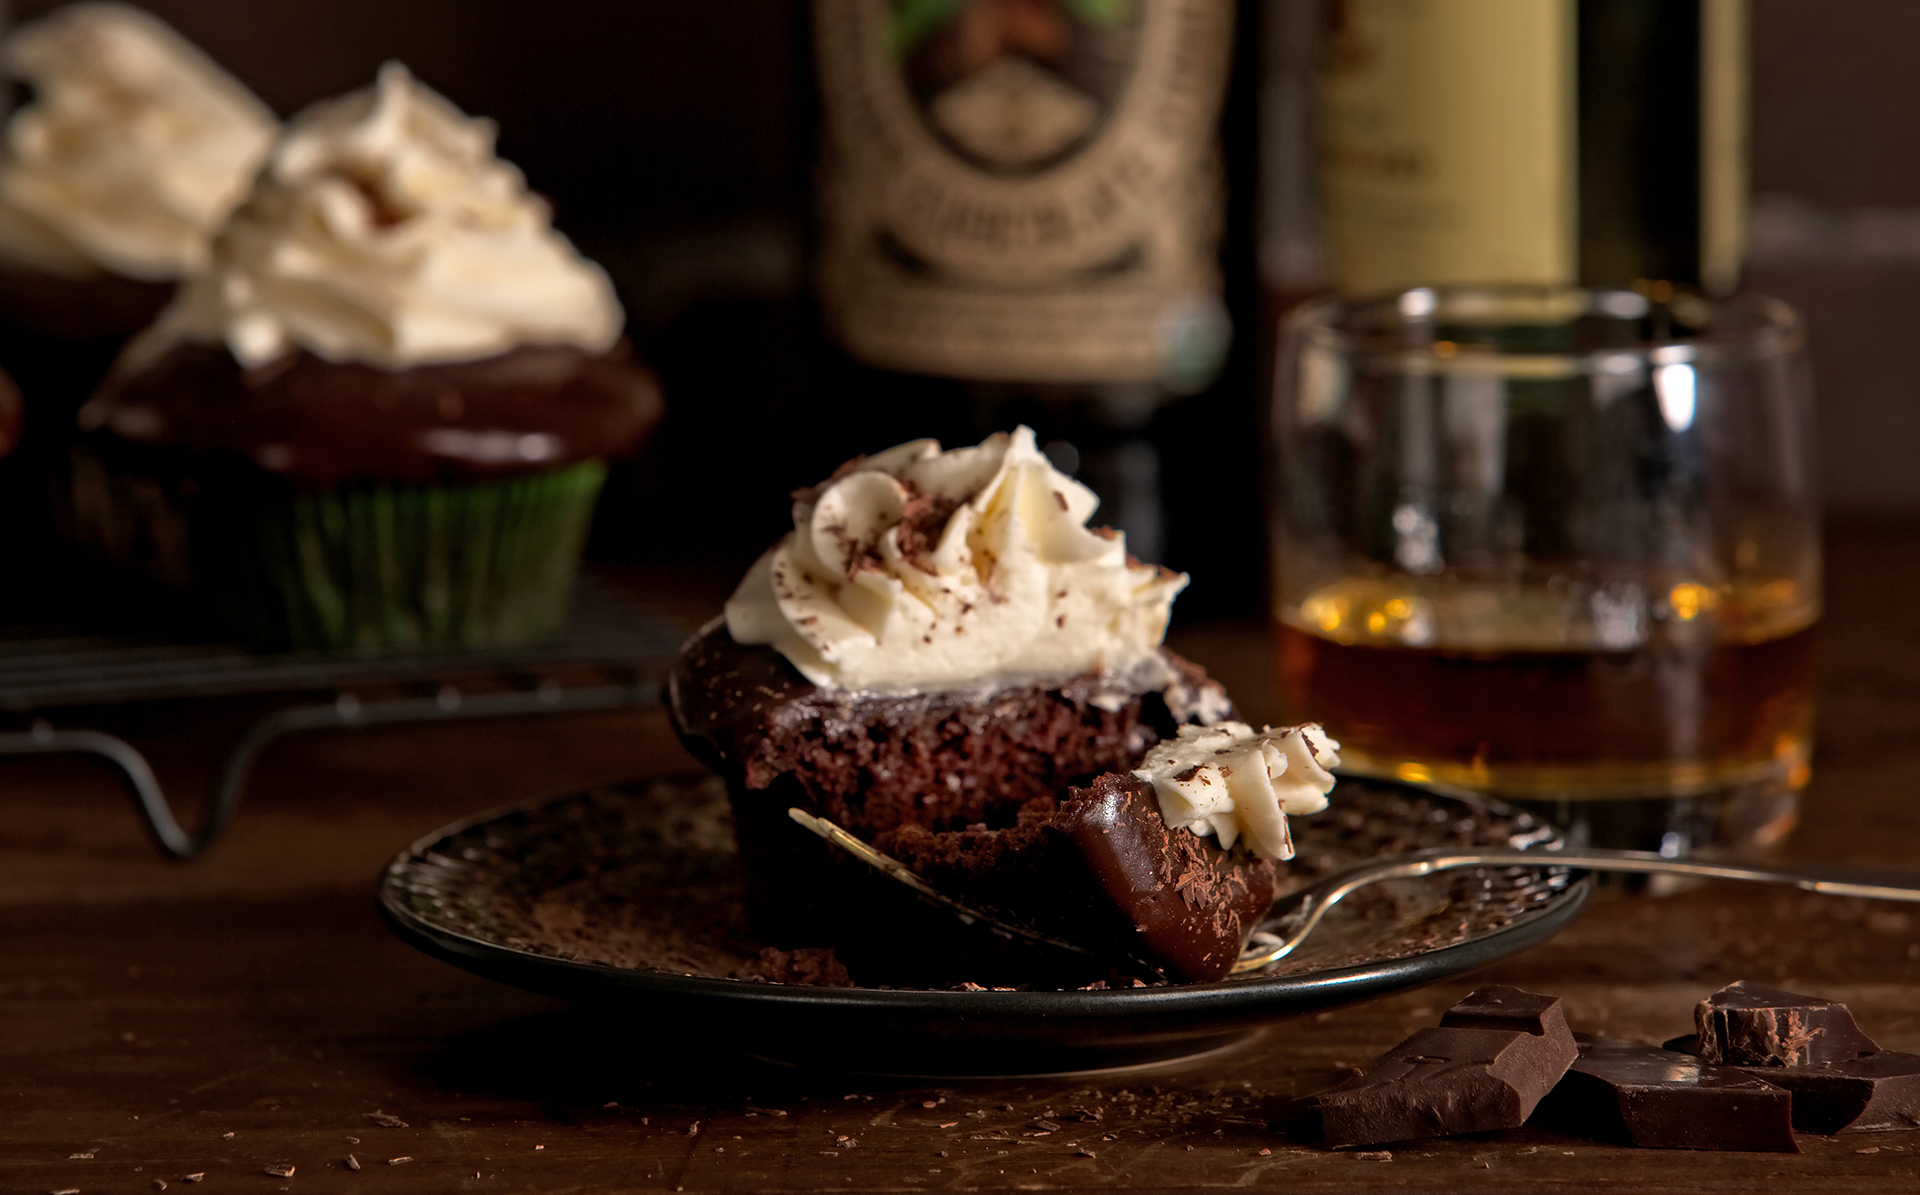 Chocolate Irish stout cupcakes with fork ready to take a bite